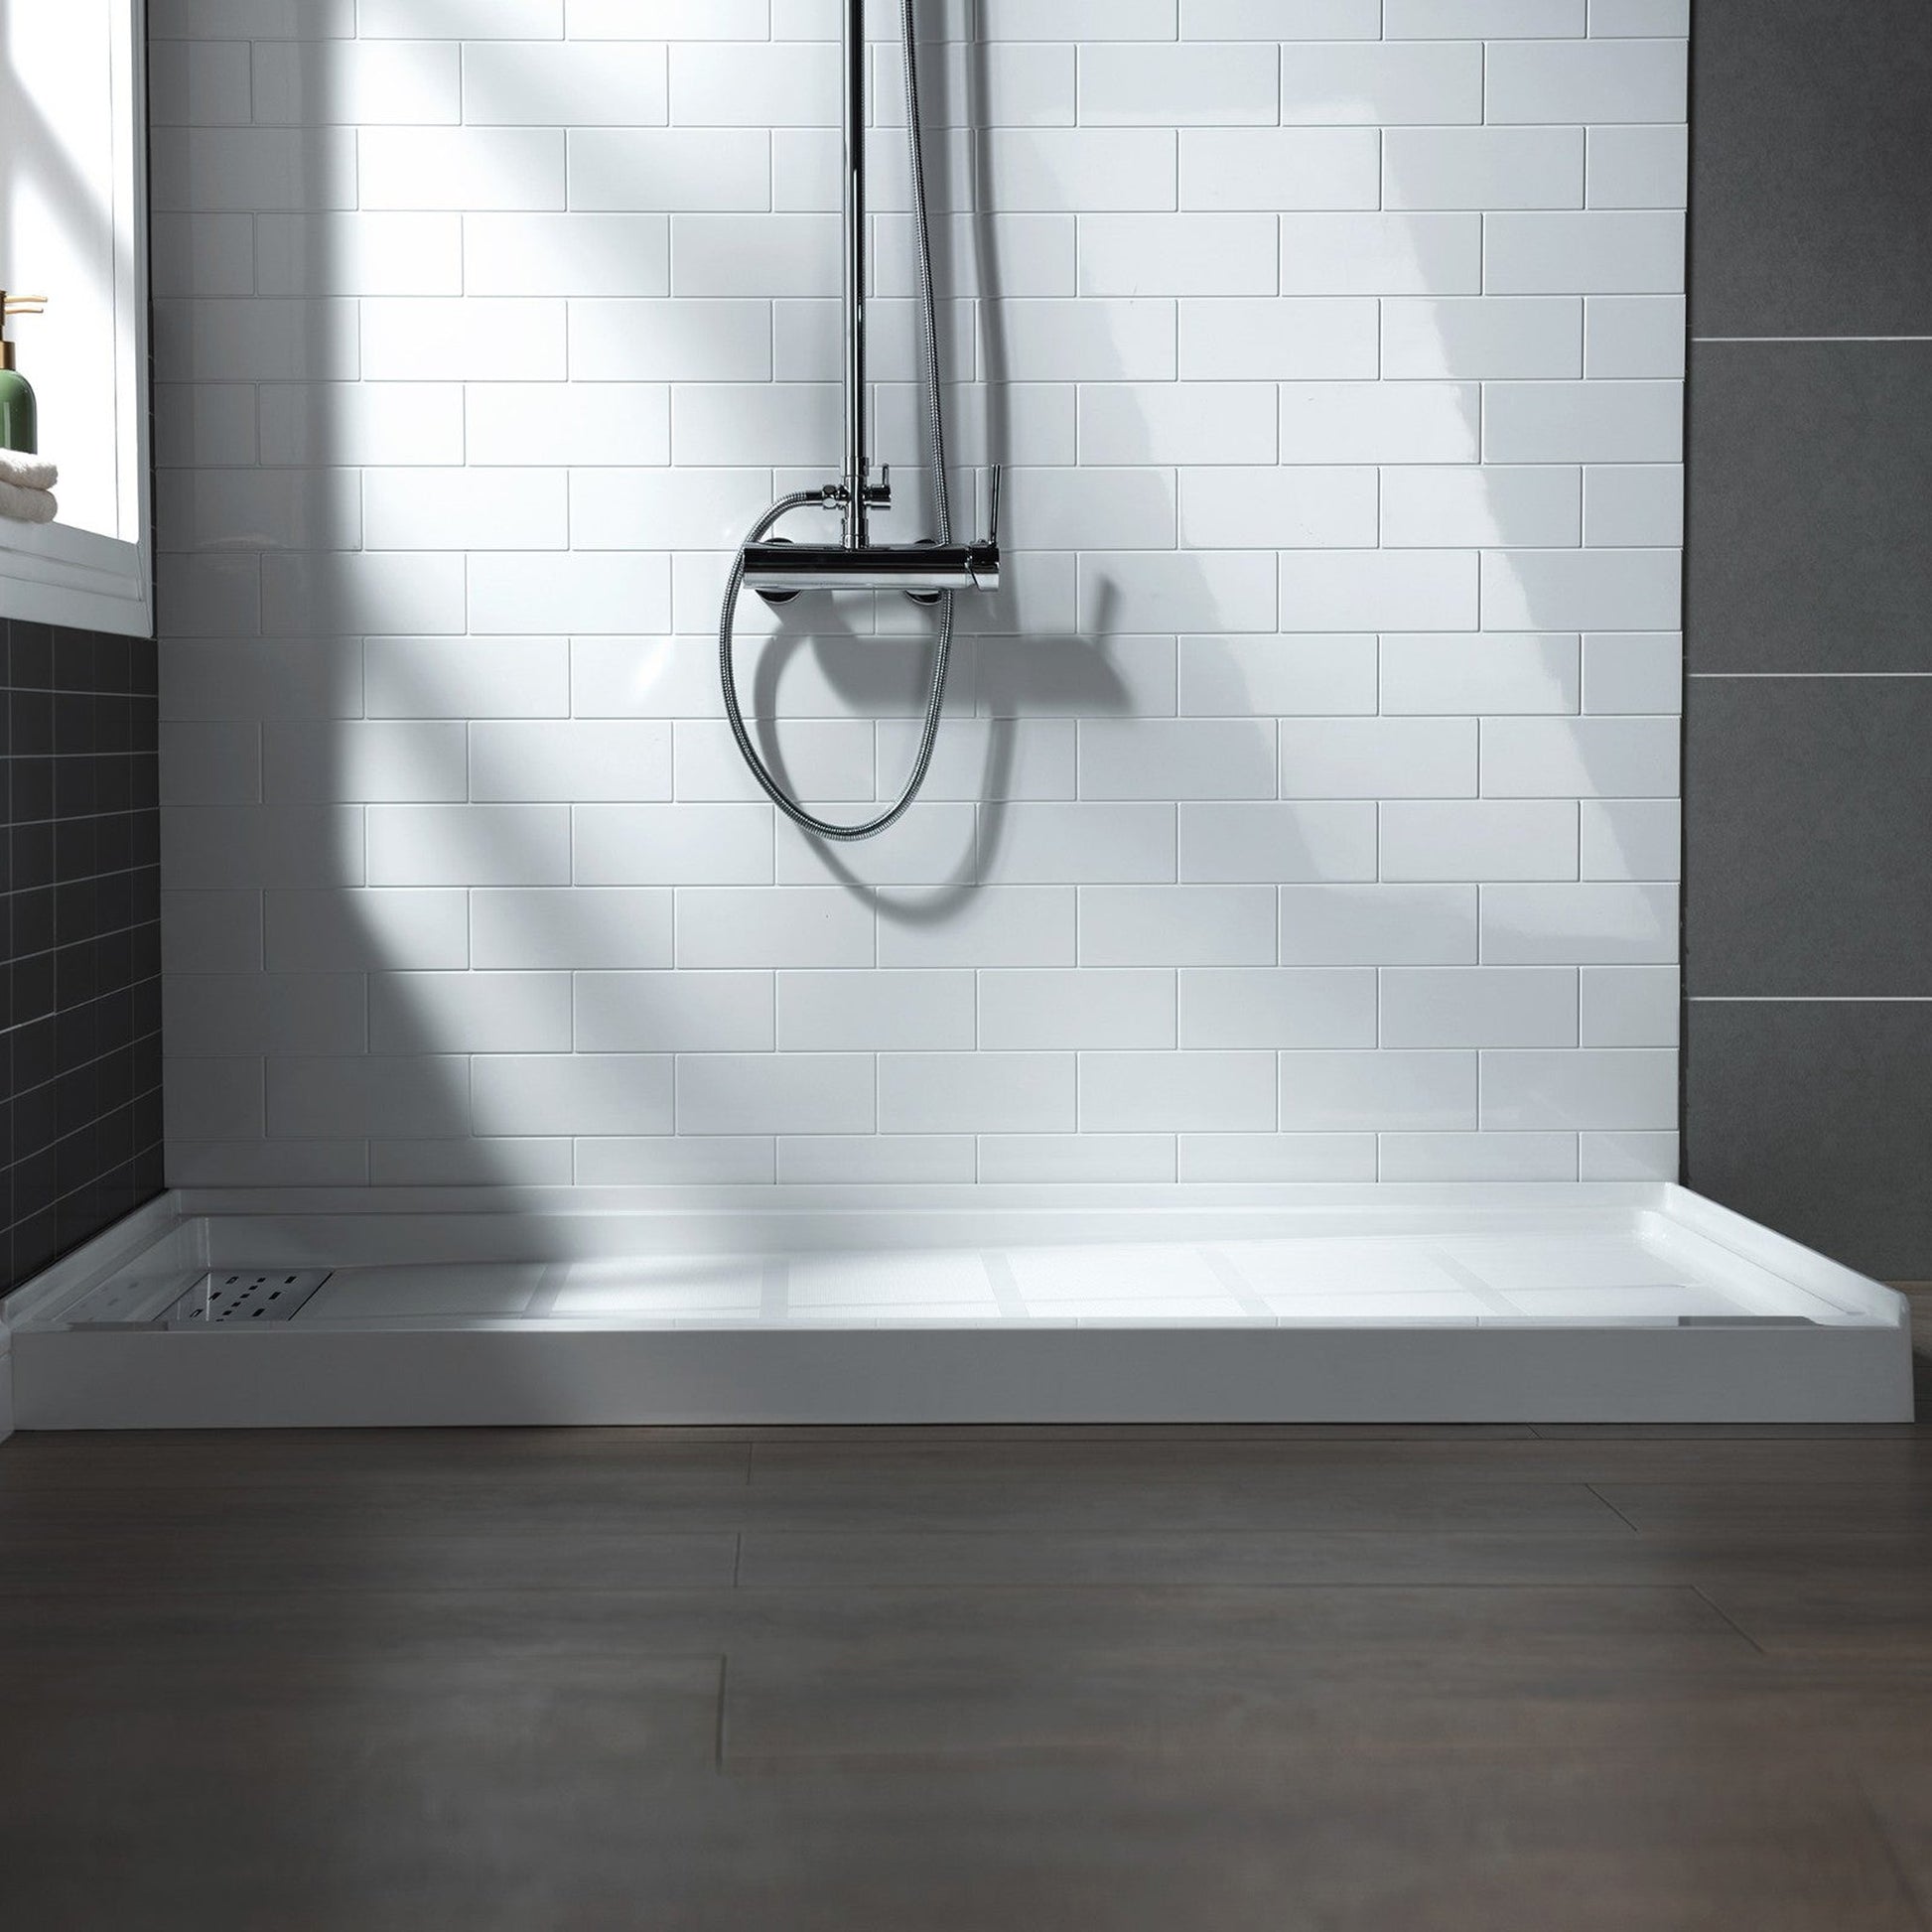 WoodBridge 48" x 36" White Solid Surface Shower Base Left Drain Location With Brushed Nickel Trench Drain Cover